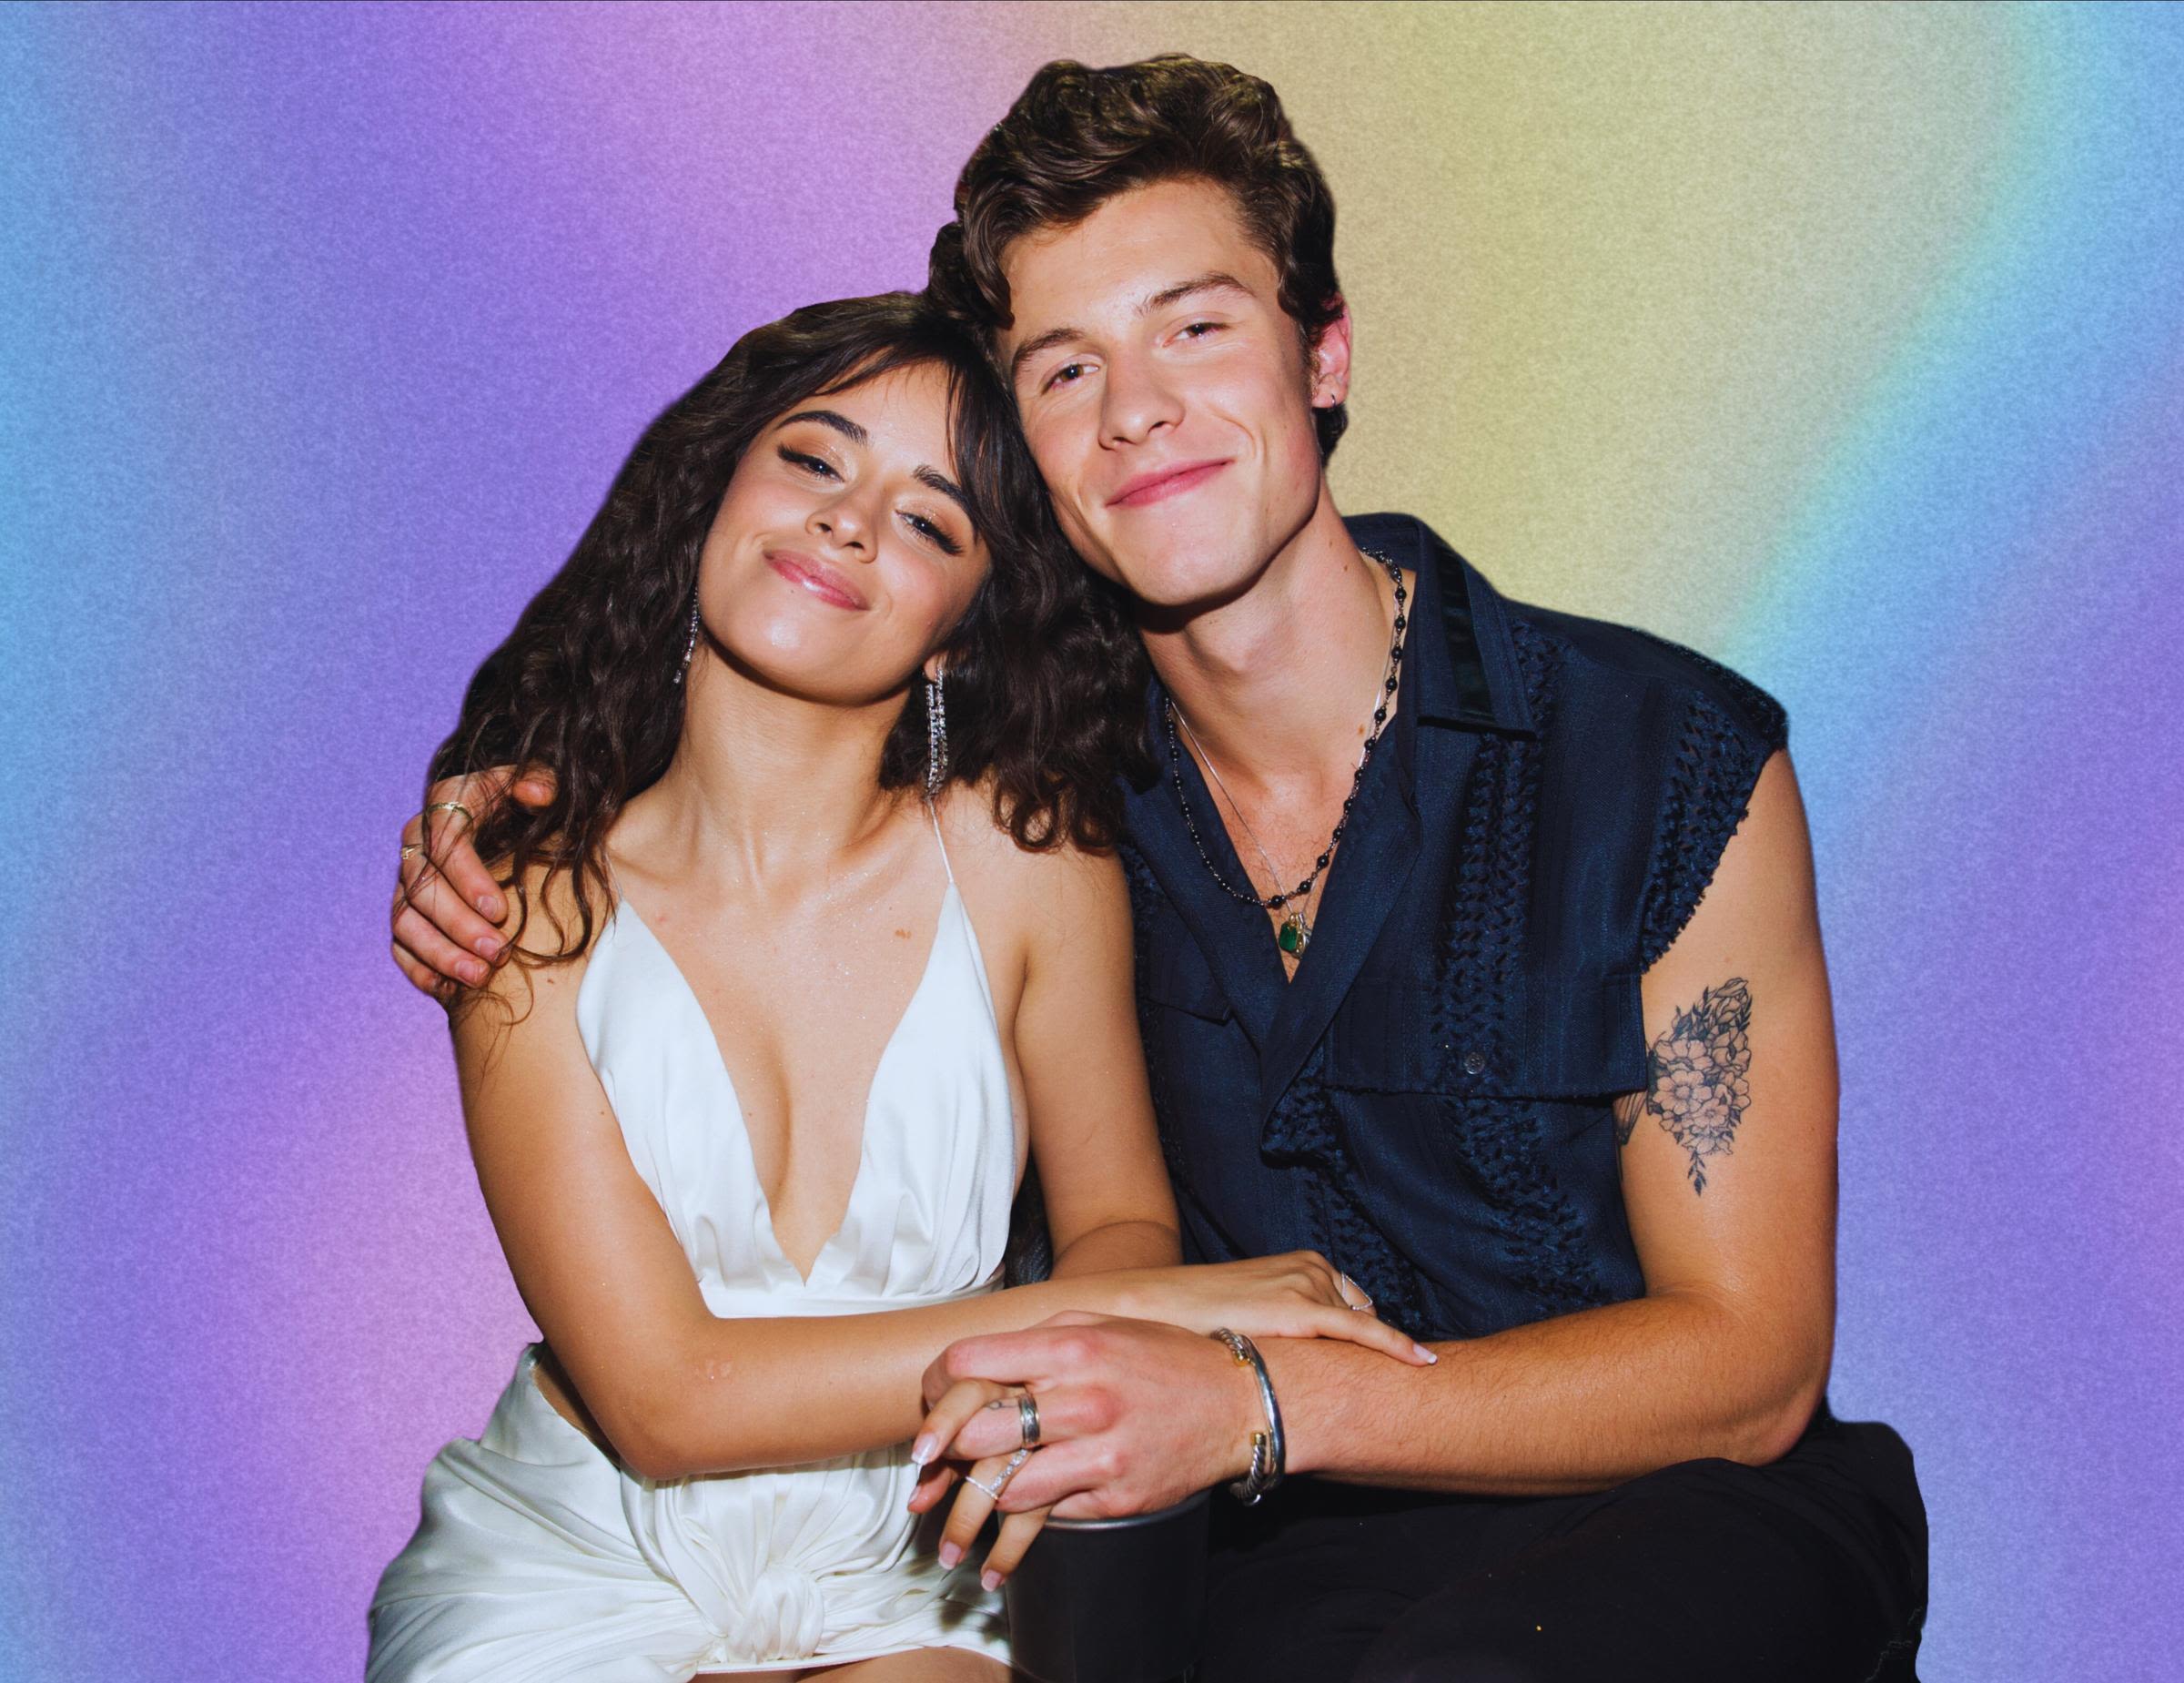 Camila Cabello & Shawn Mendes's Complete Relationship Timeline